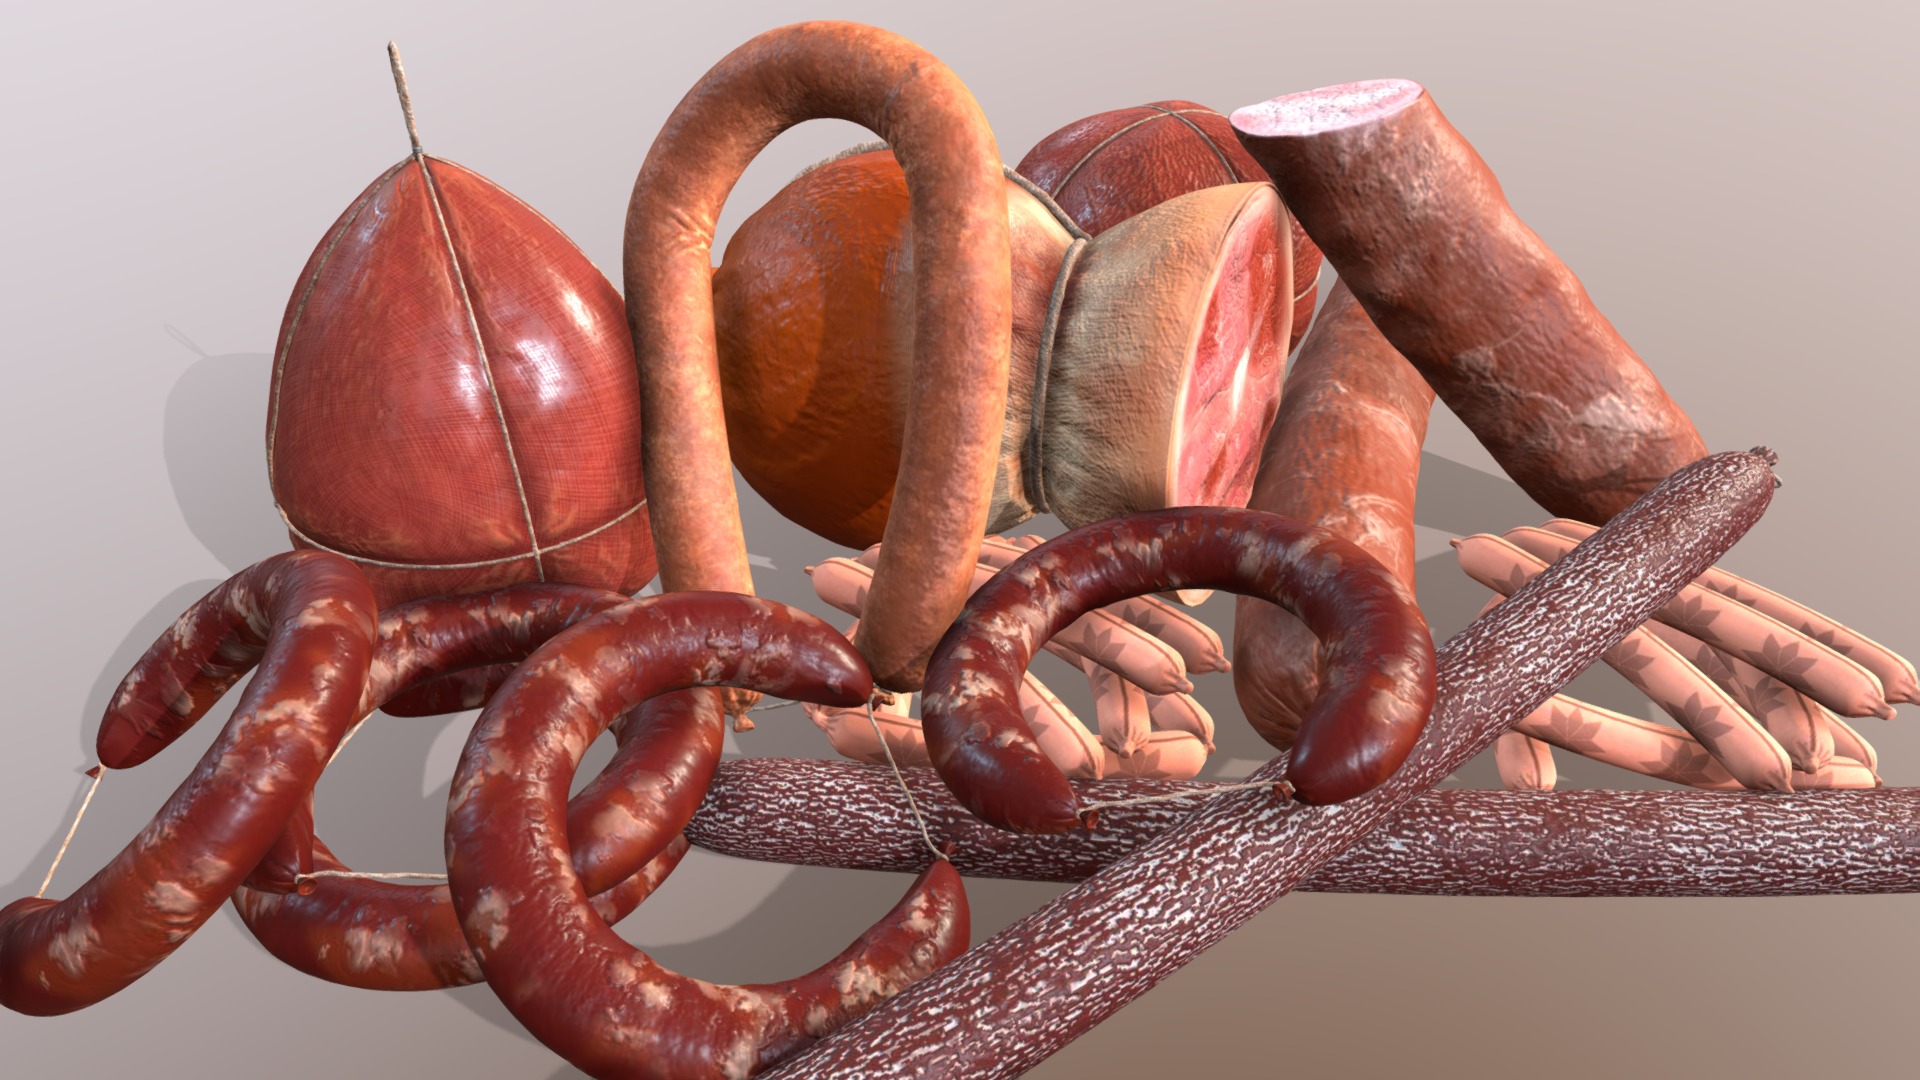 his high quality 3D model comes with a collection of meats - salami, ham, sausage. It can suits for advertising of product and design. S
o, you have: High poly realistic model. Fully detailed, textured model. Excellent for close-up renders. Real world size. Files units are centimeters and all models are accurately scaled to represent real-life object's dimensions 3d model